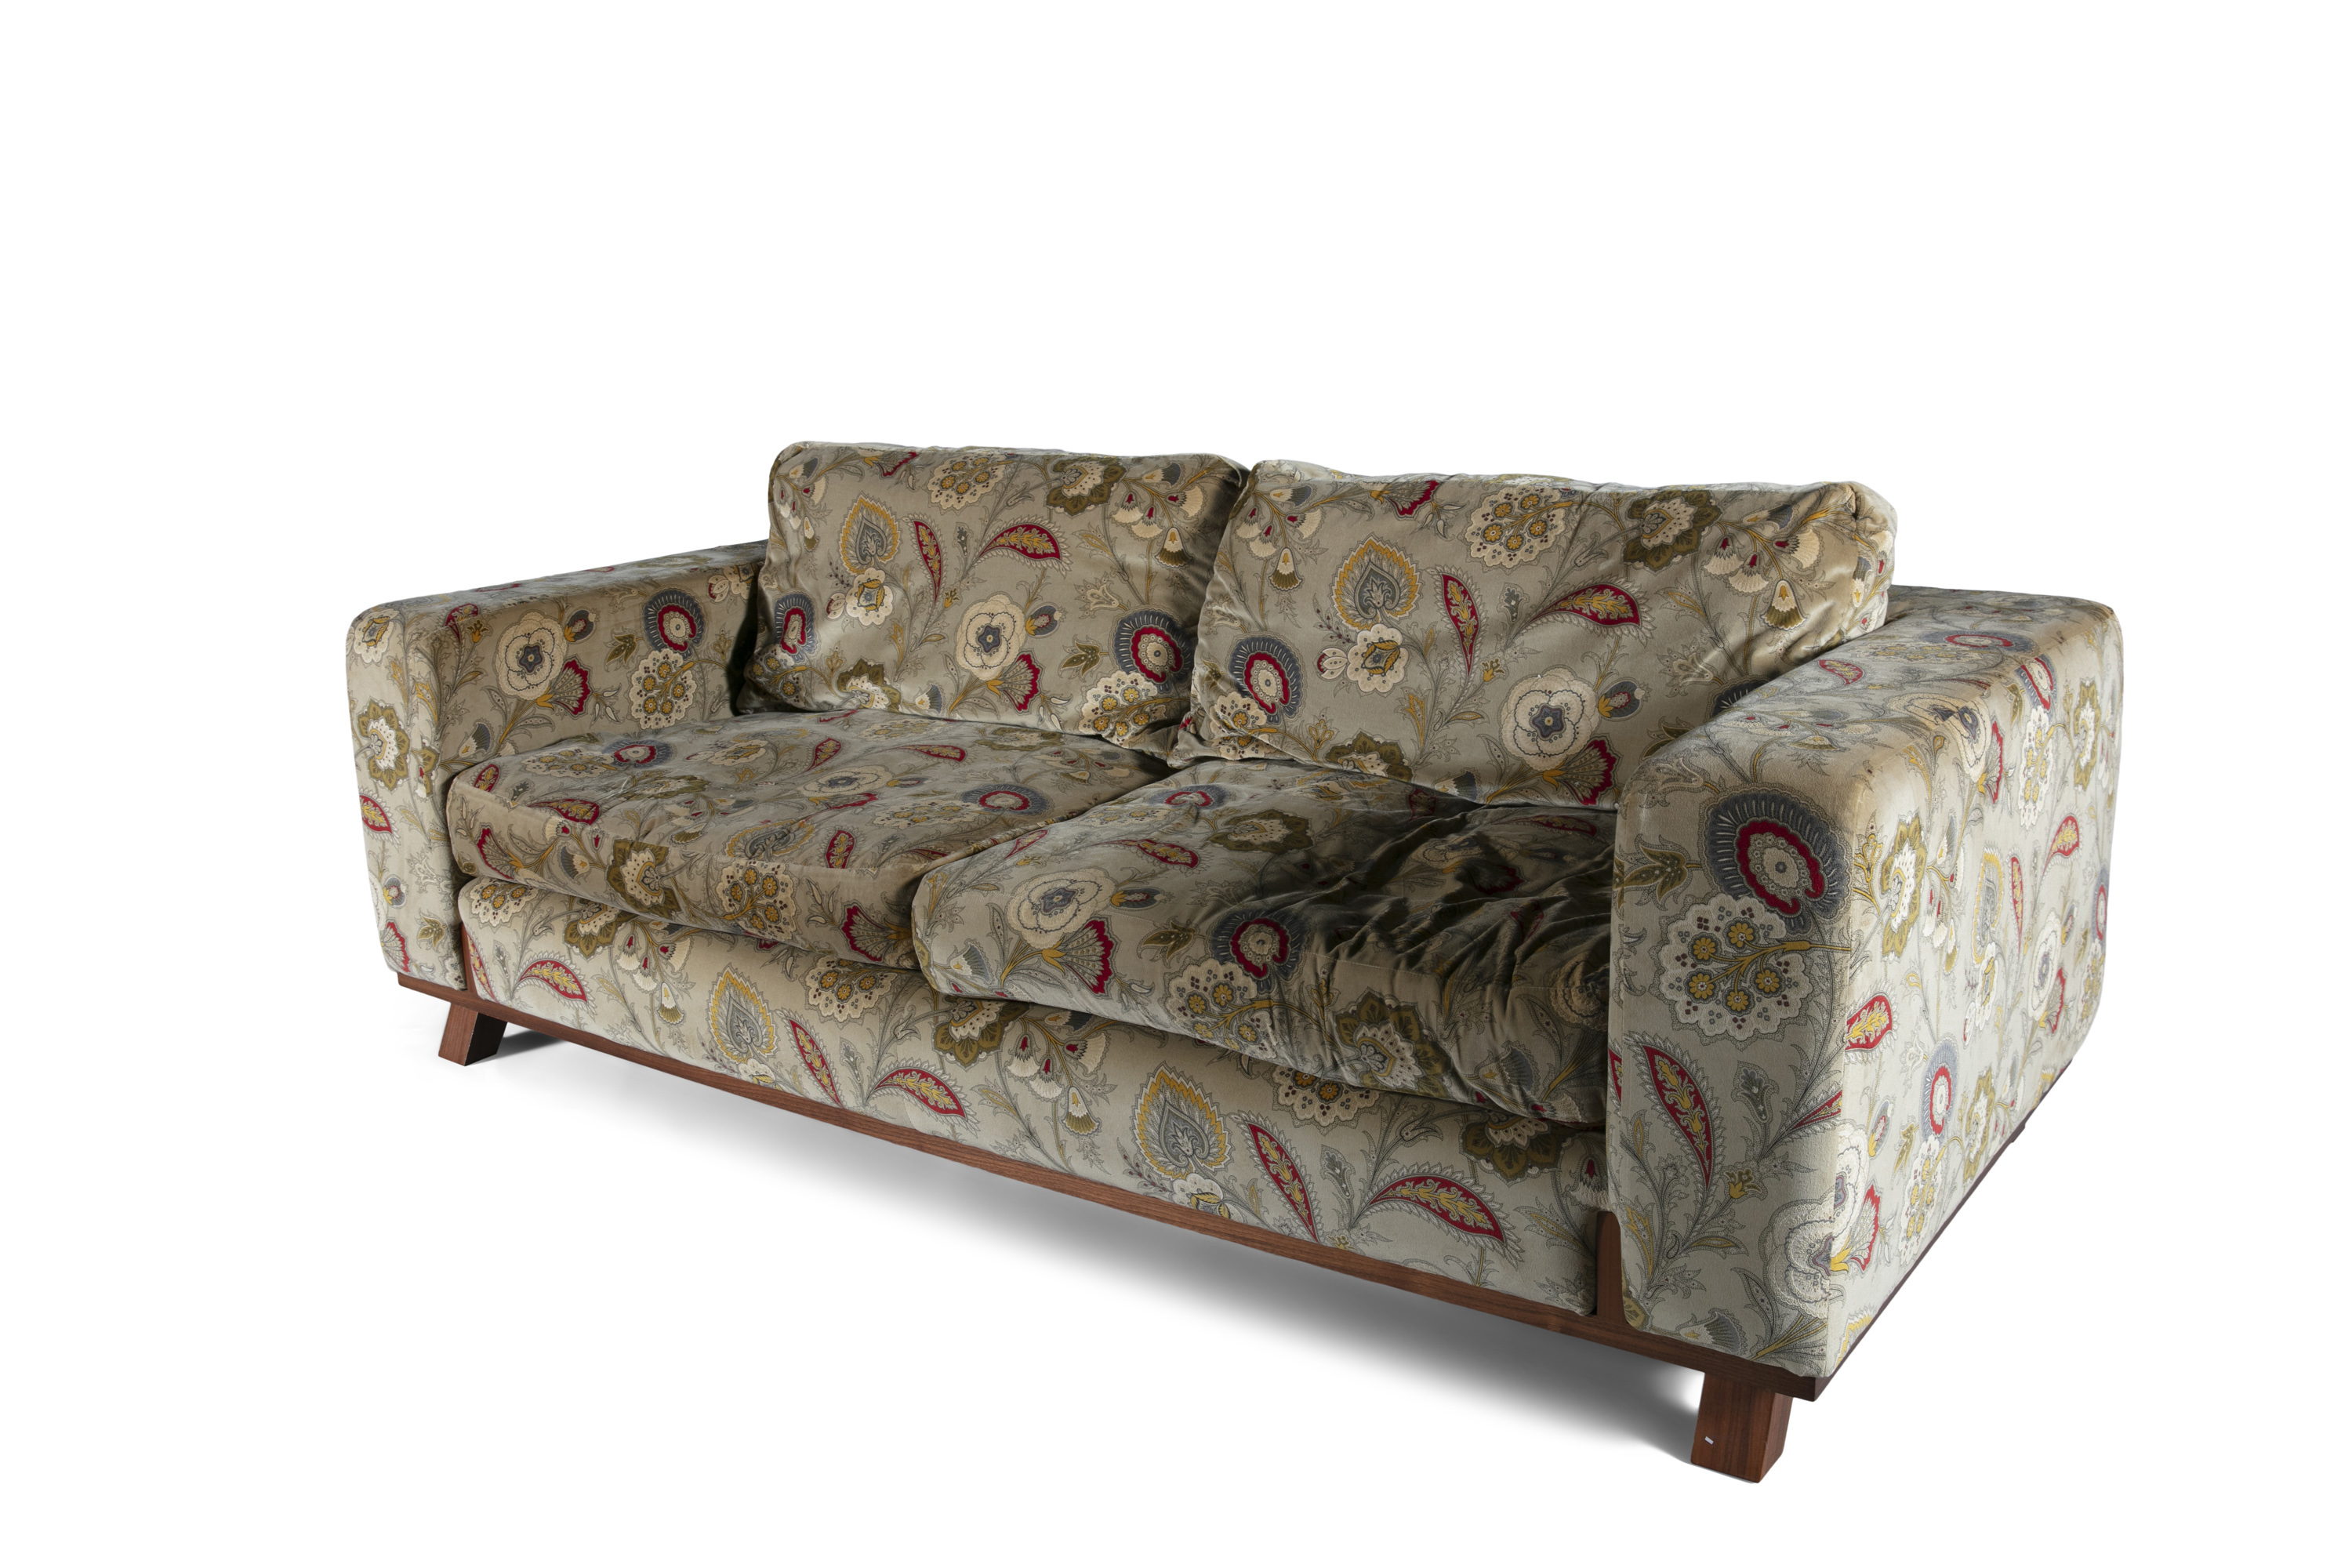 A TWO-SEATER FLORAL PATTERNED COUCH BY LINLEY, upholstered in biscuit beige fabric with floral - Image 2 of 2